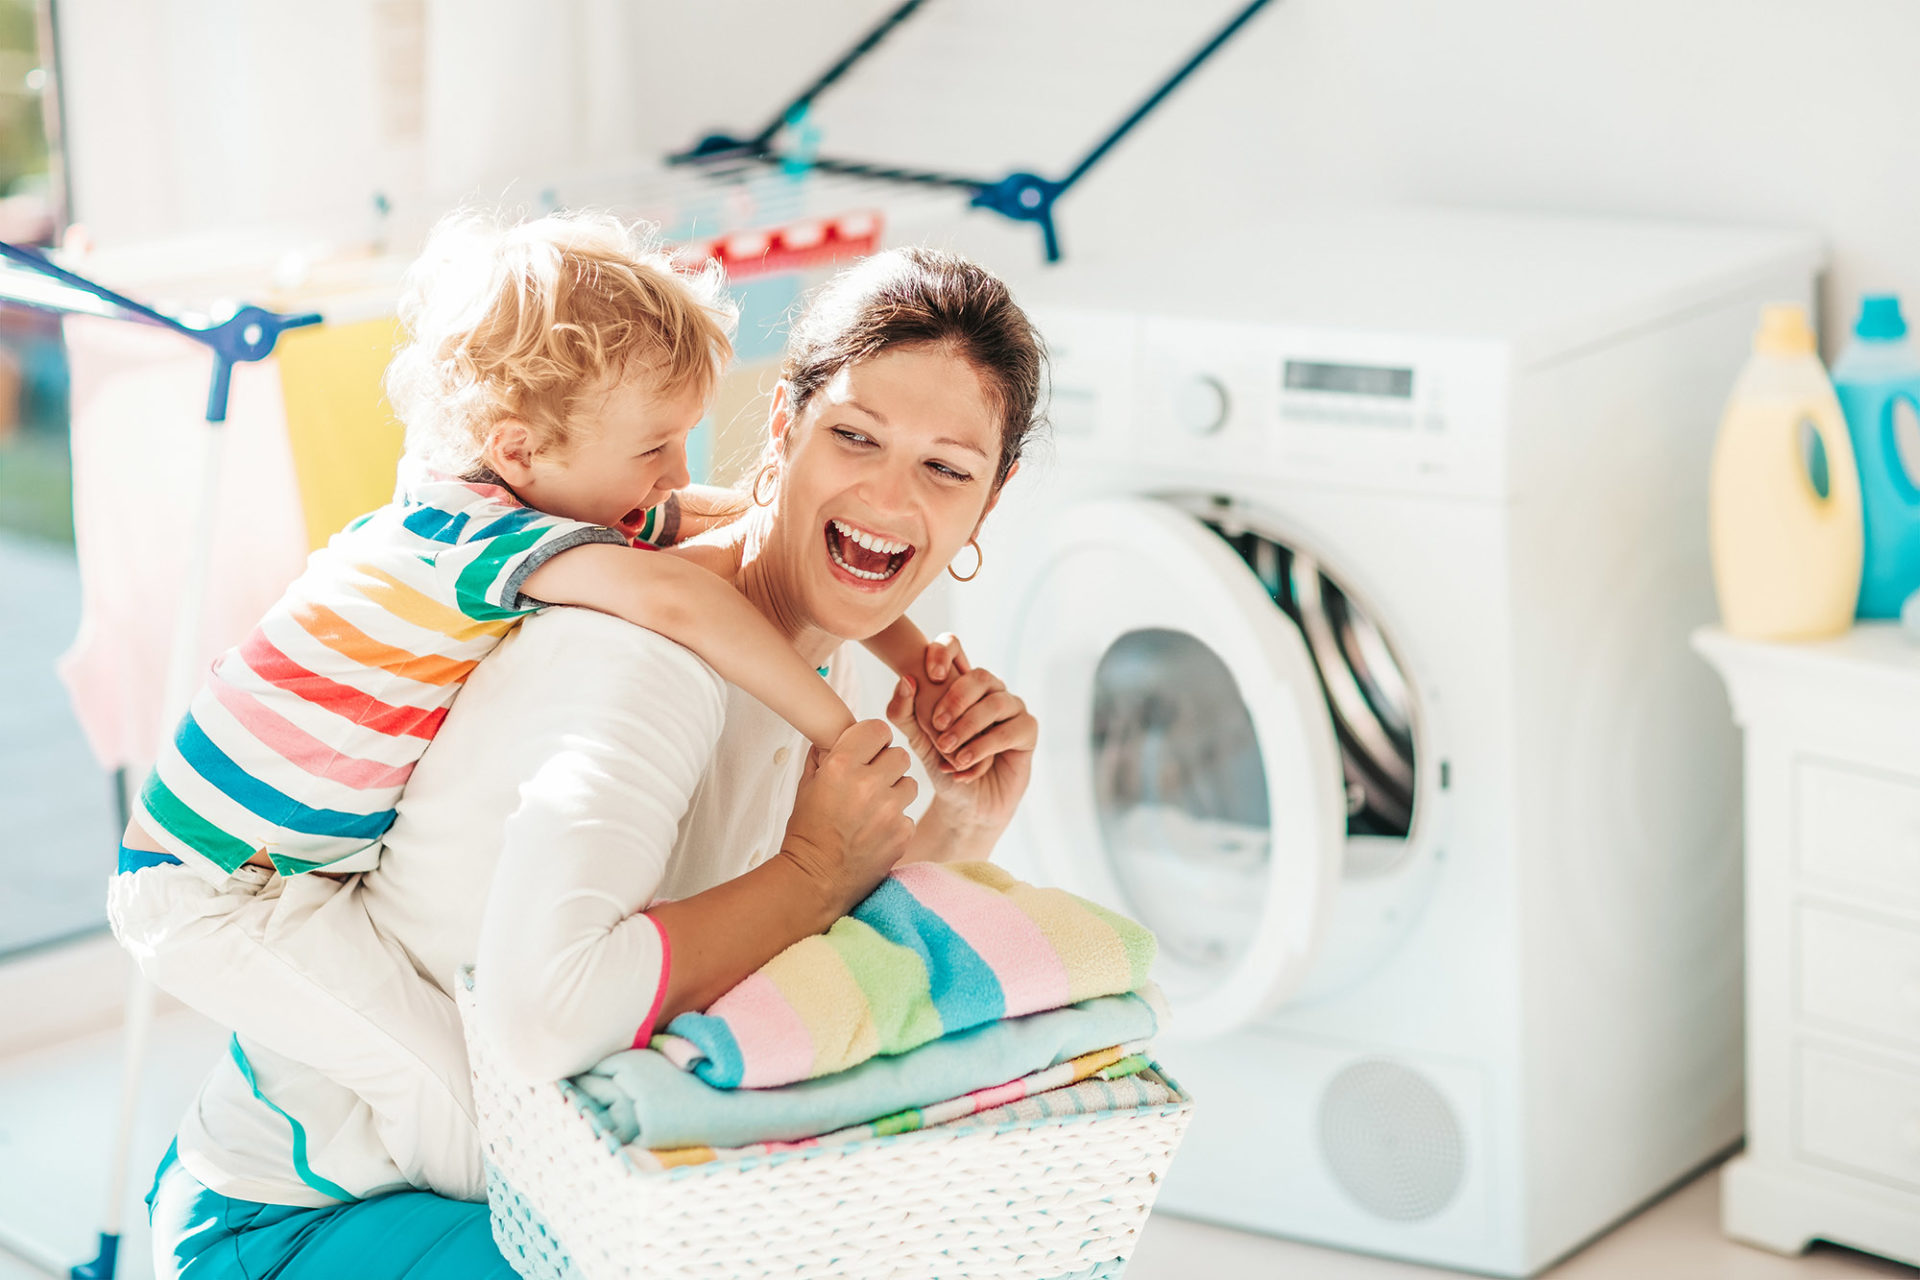 9 Laundry Room Must-Haves That'll Take the Tedium Out of This Task